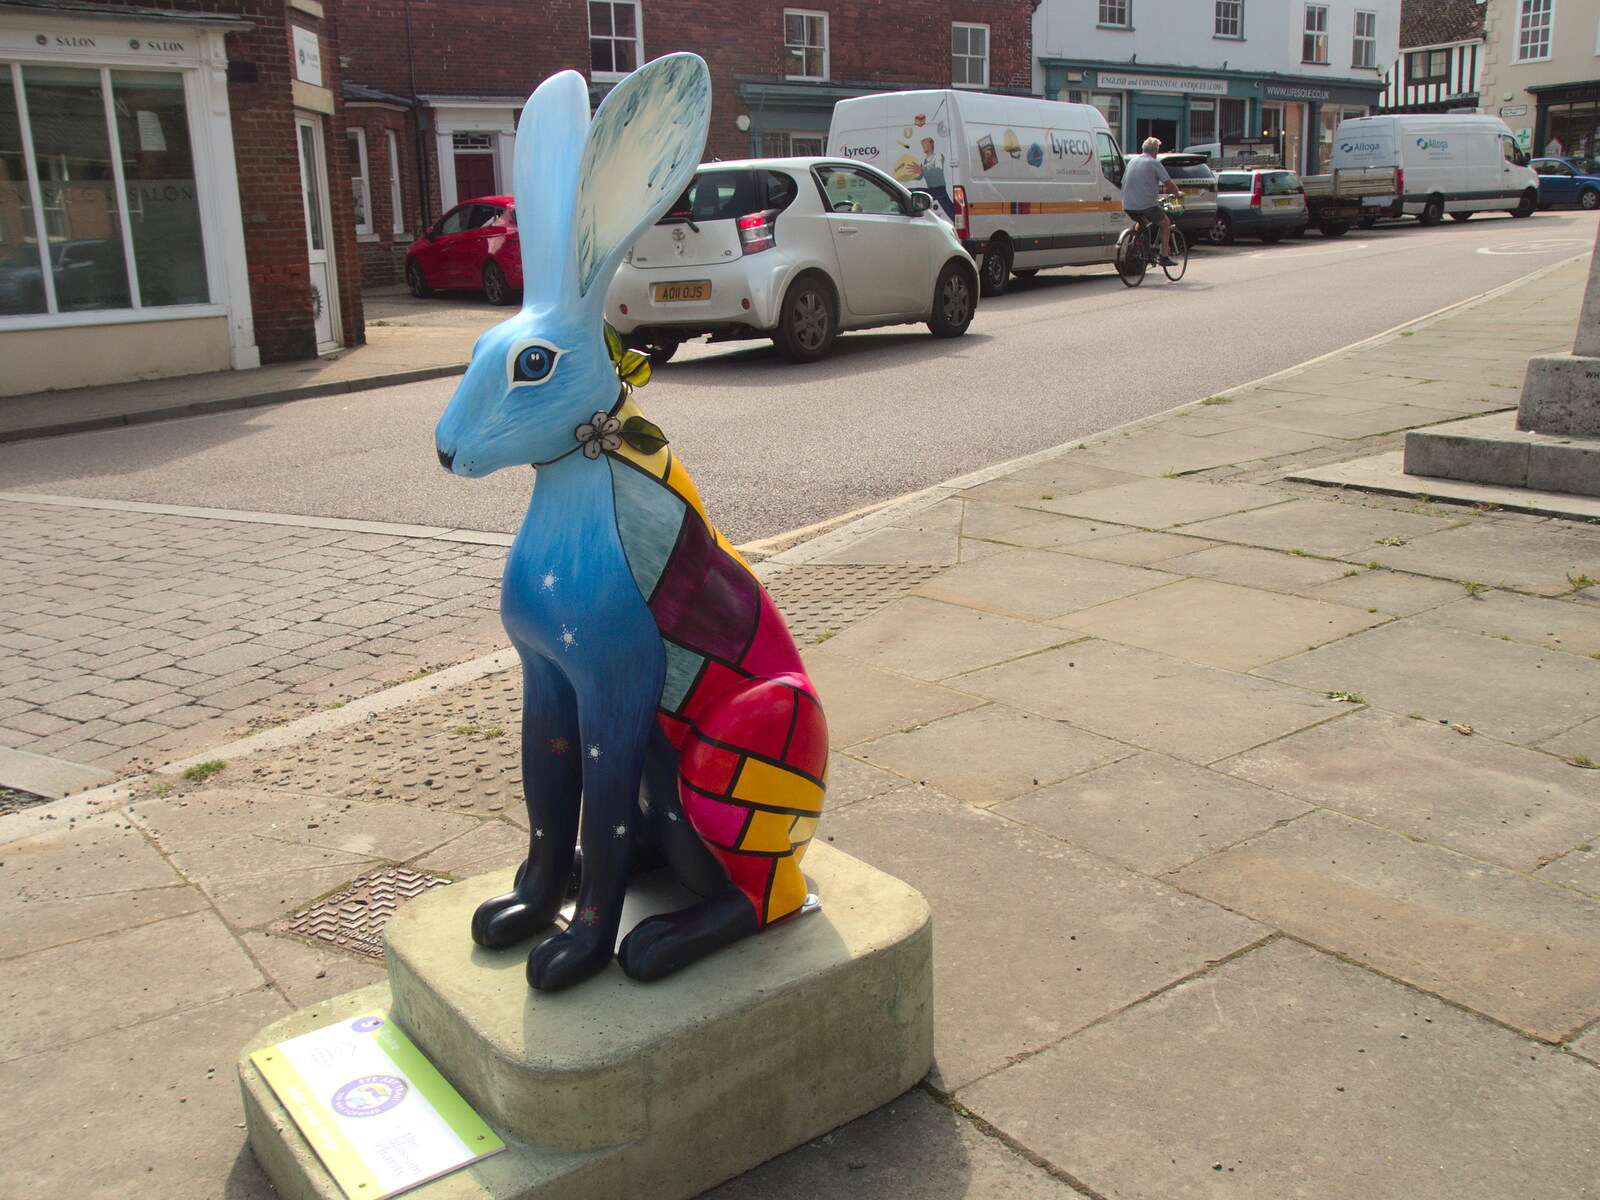 The hare on Lambseth Street from Hares, Tortoises and Station 119, Eye, Suffolk - 19th July 2021